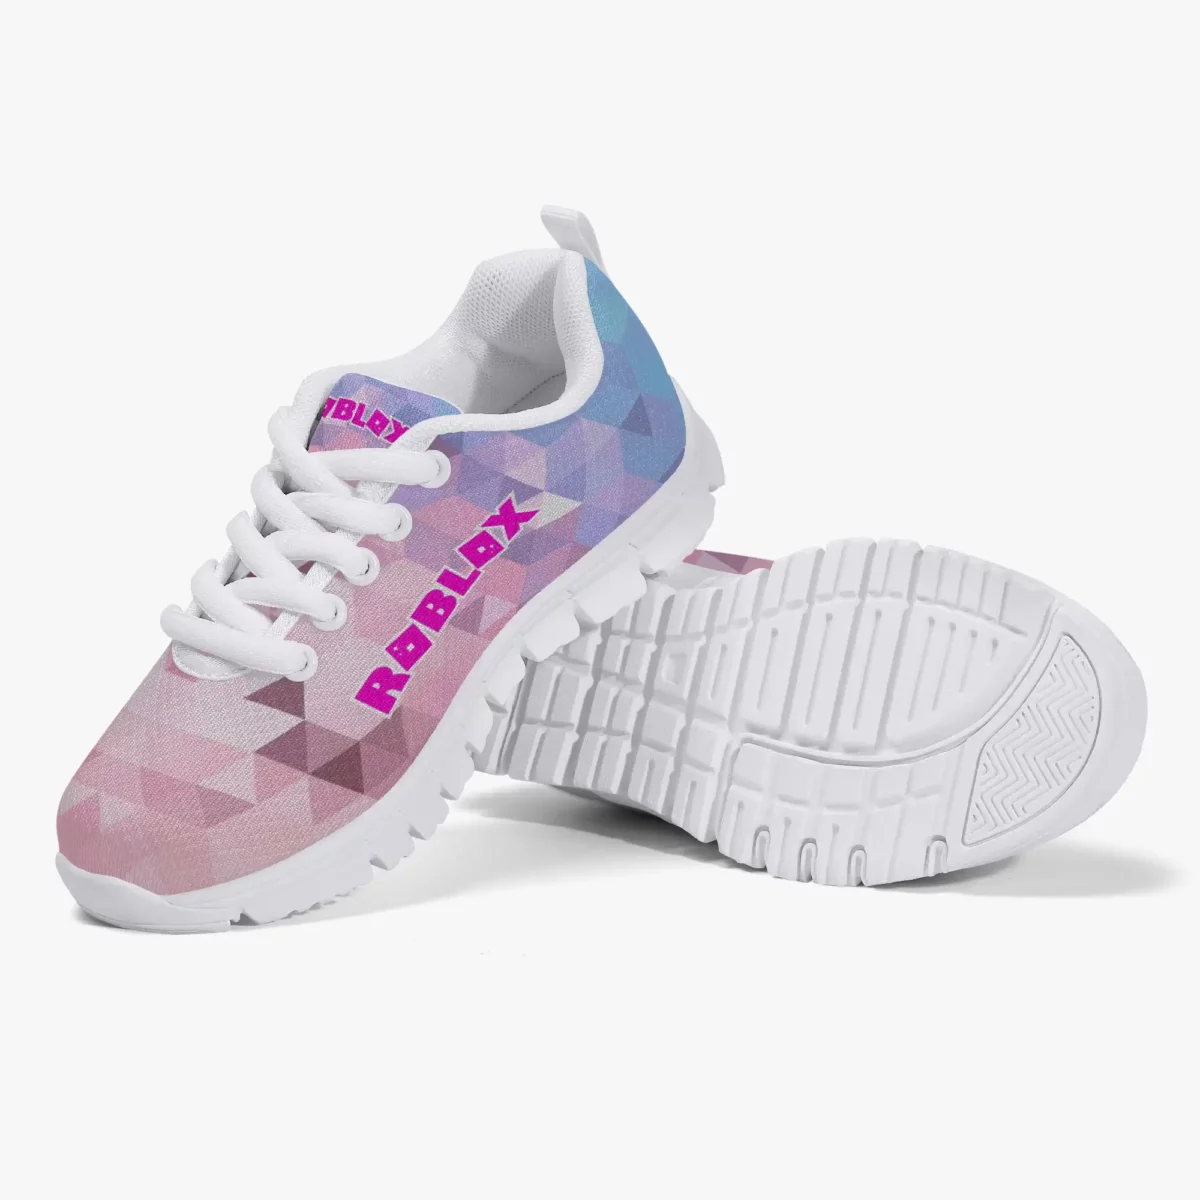 Roblox Girls Personalized Lightweight Mesh Sneakers Inspired by Roblox Girl Video Games Cool Kiddo 20